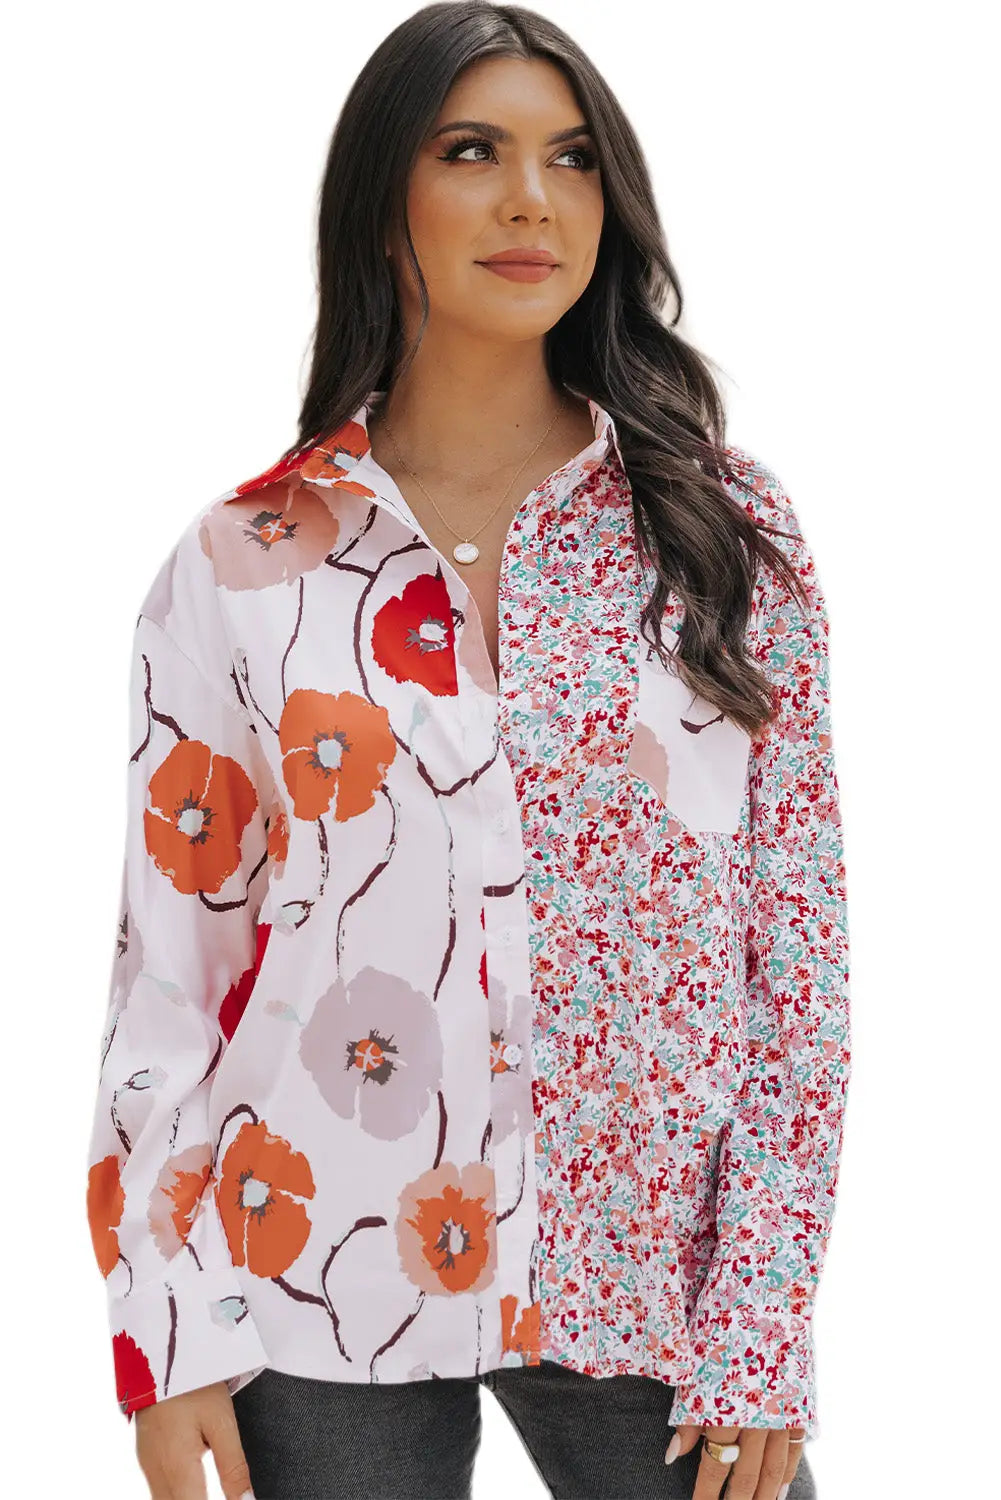 Red floral patchwork buttoned shirt with pocket - tops